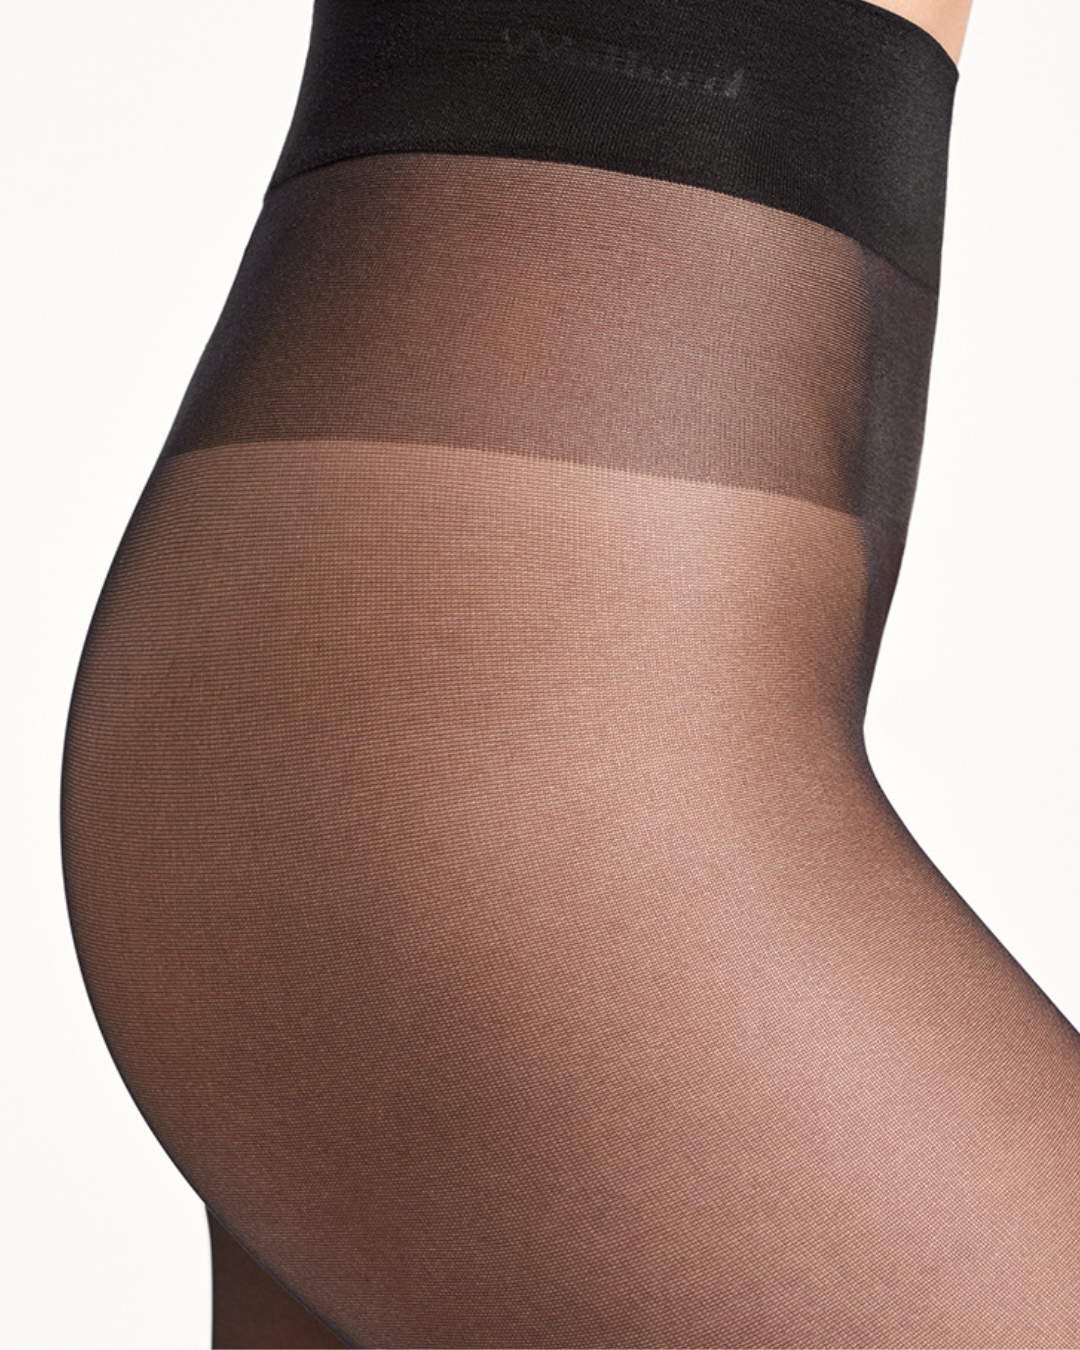 Satin Touch 20 Leggings  Footless leggings, Footless tights, Wolford